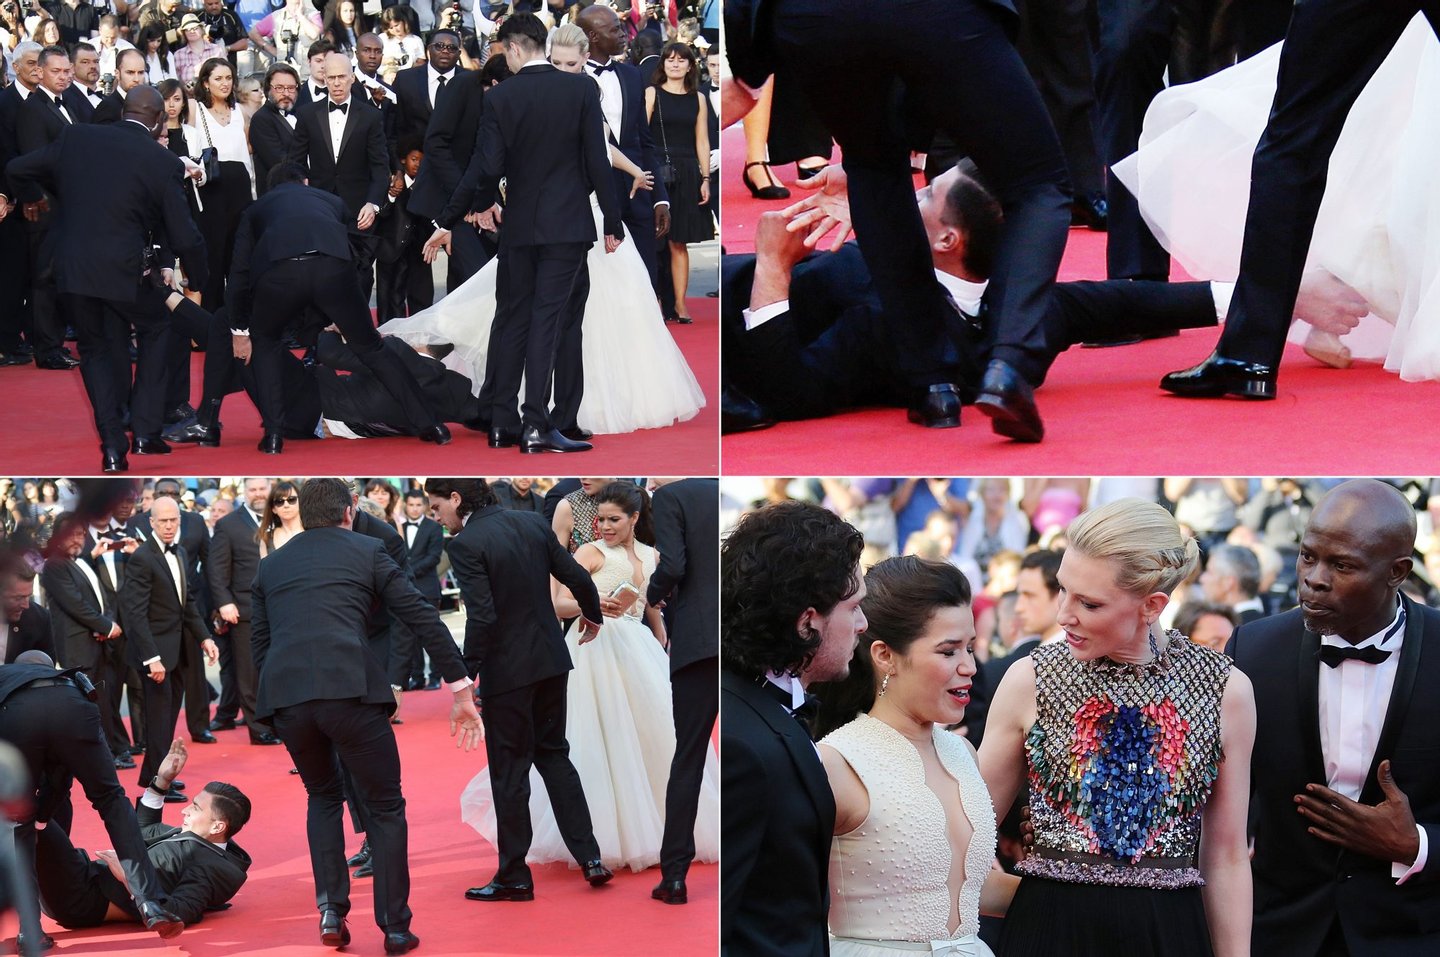 A combination of pictures made on May 17, 2014 shows prankster Vitalii Sediuk blocked by minders as he tries to slip under US actress America Ferrera's dress as she arrives for the screening of the animated film "How to train your Dragon 2" at the 67th edition of the Cannes Film Festival in Cannes, southern France, on May 16, 2014. AFP PHOTO / AFP (Photo credit should read VALERY HACHE,ALBERTO PIZZOLI,LOIC VENANCE/AFP/Getty Images)